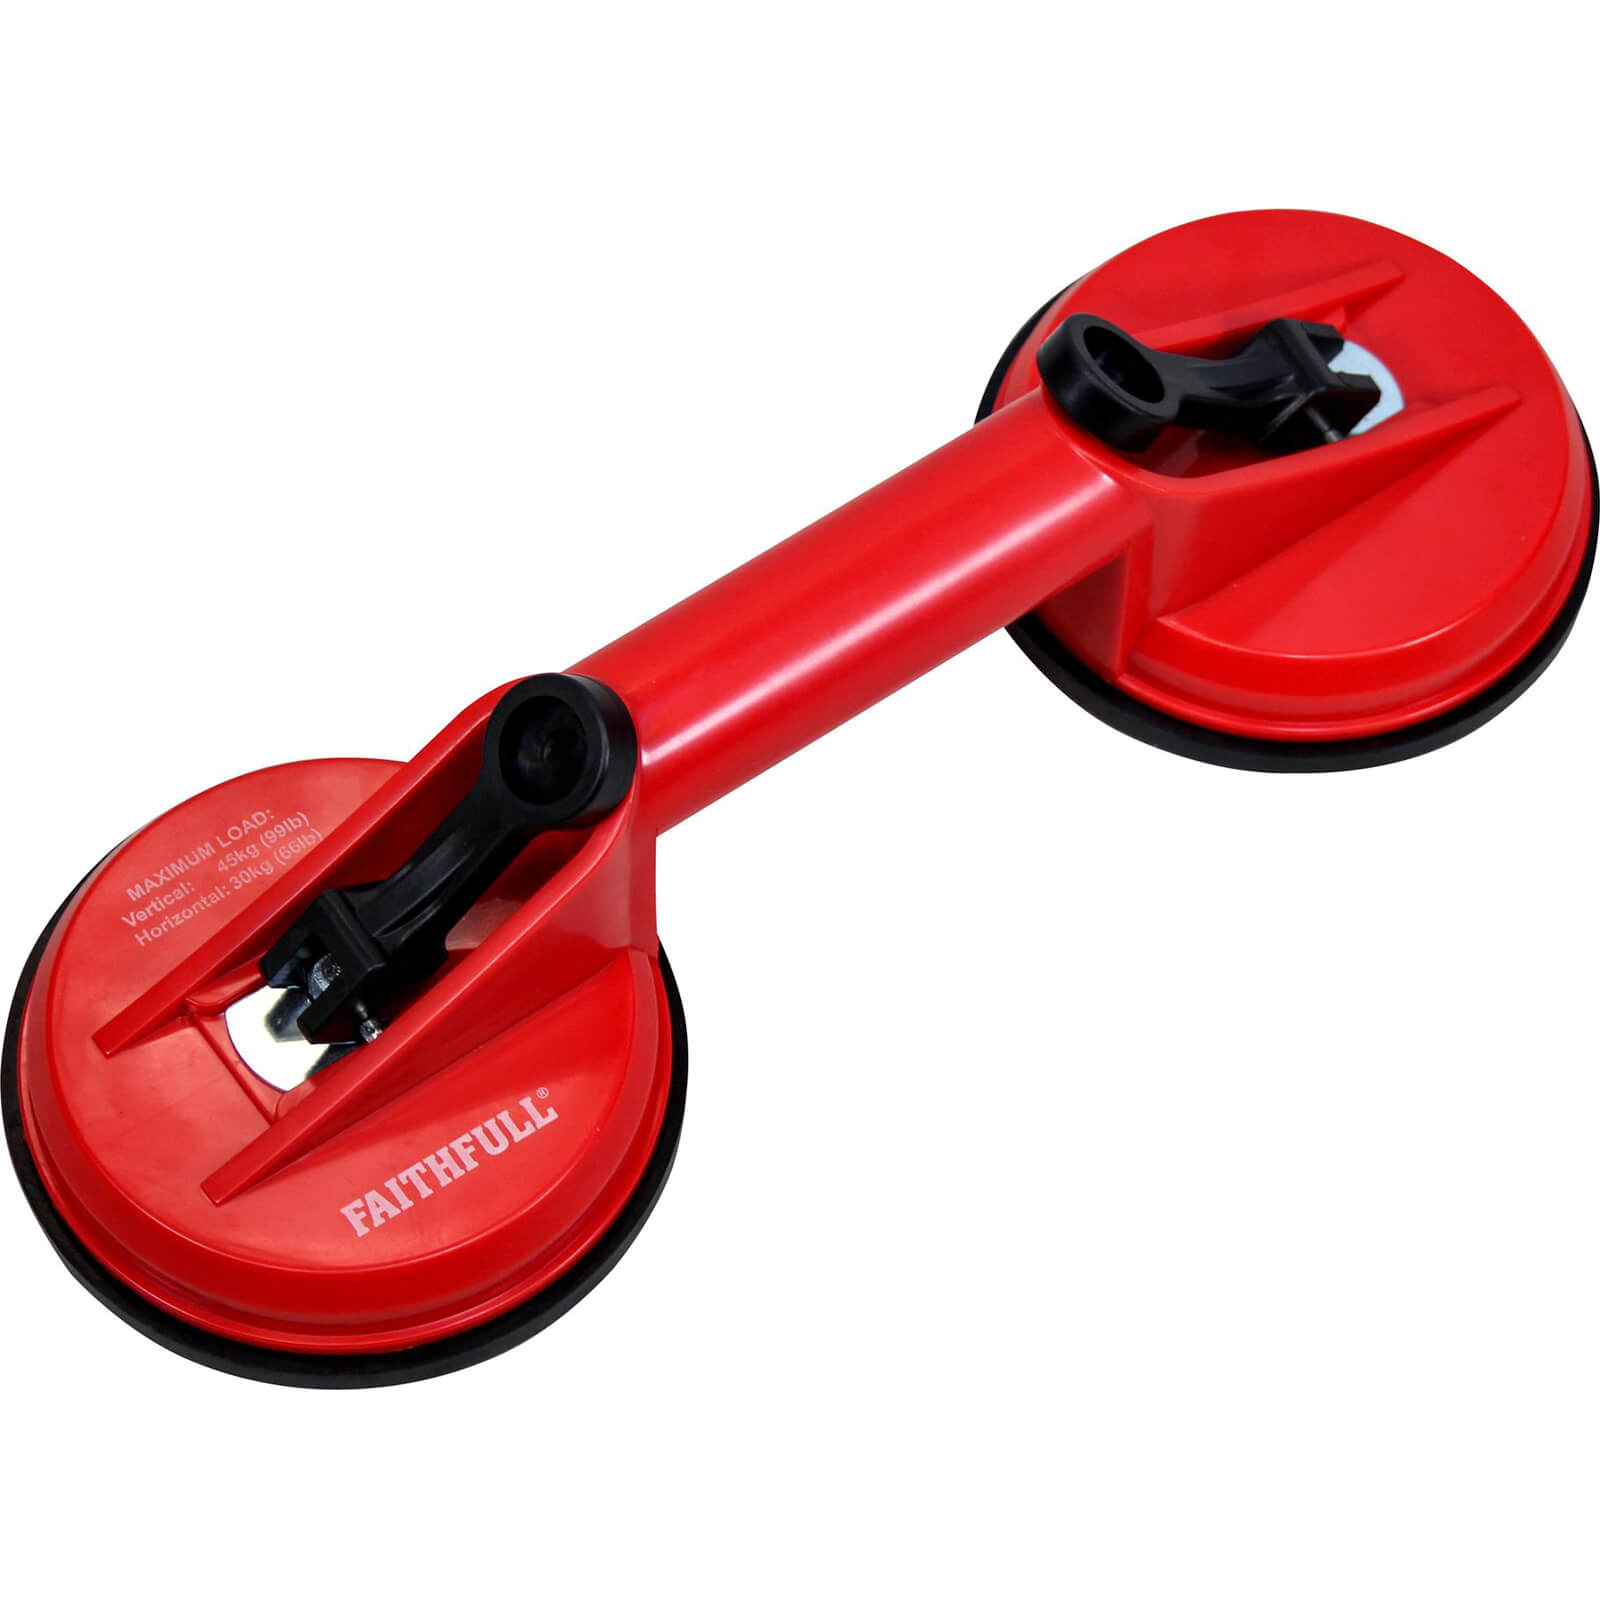 Image of Faithfull Suction Cup Lifter Double